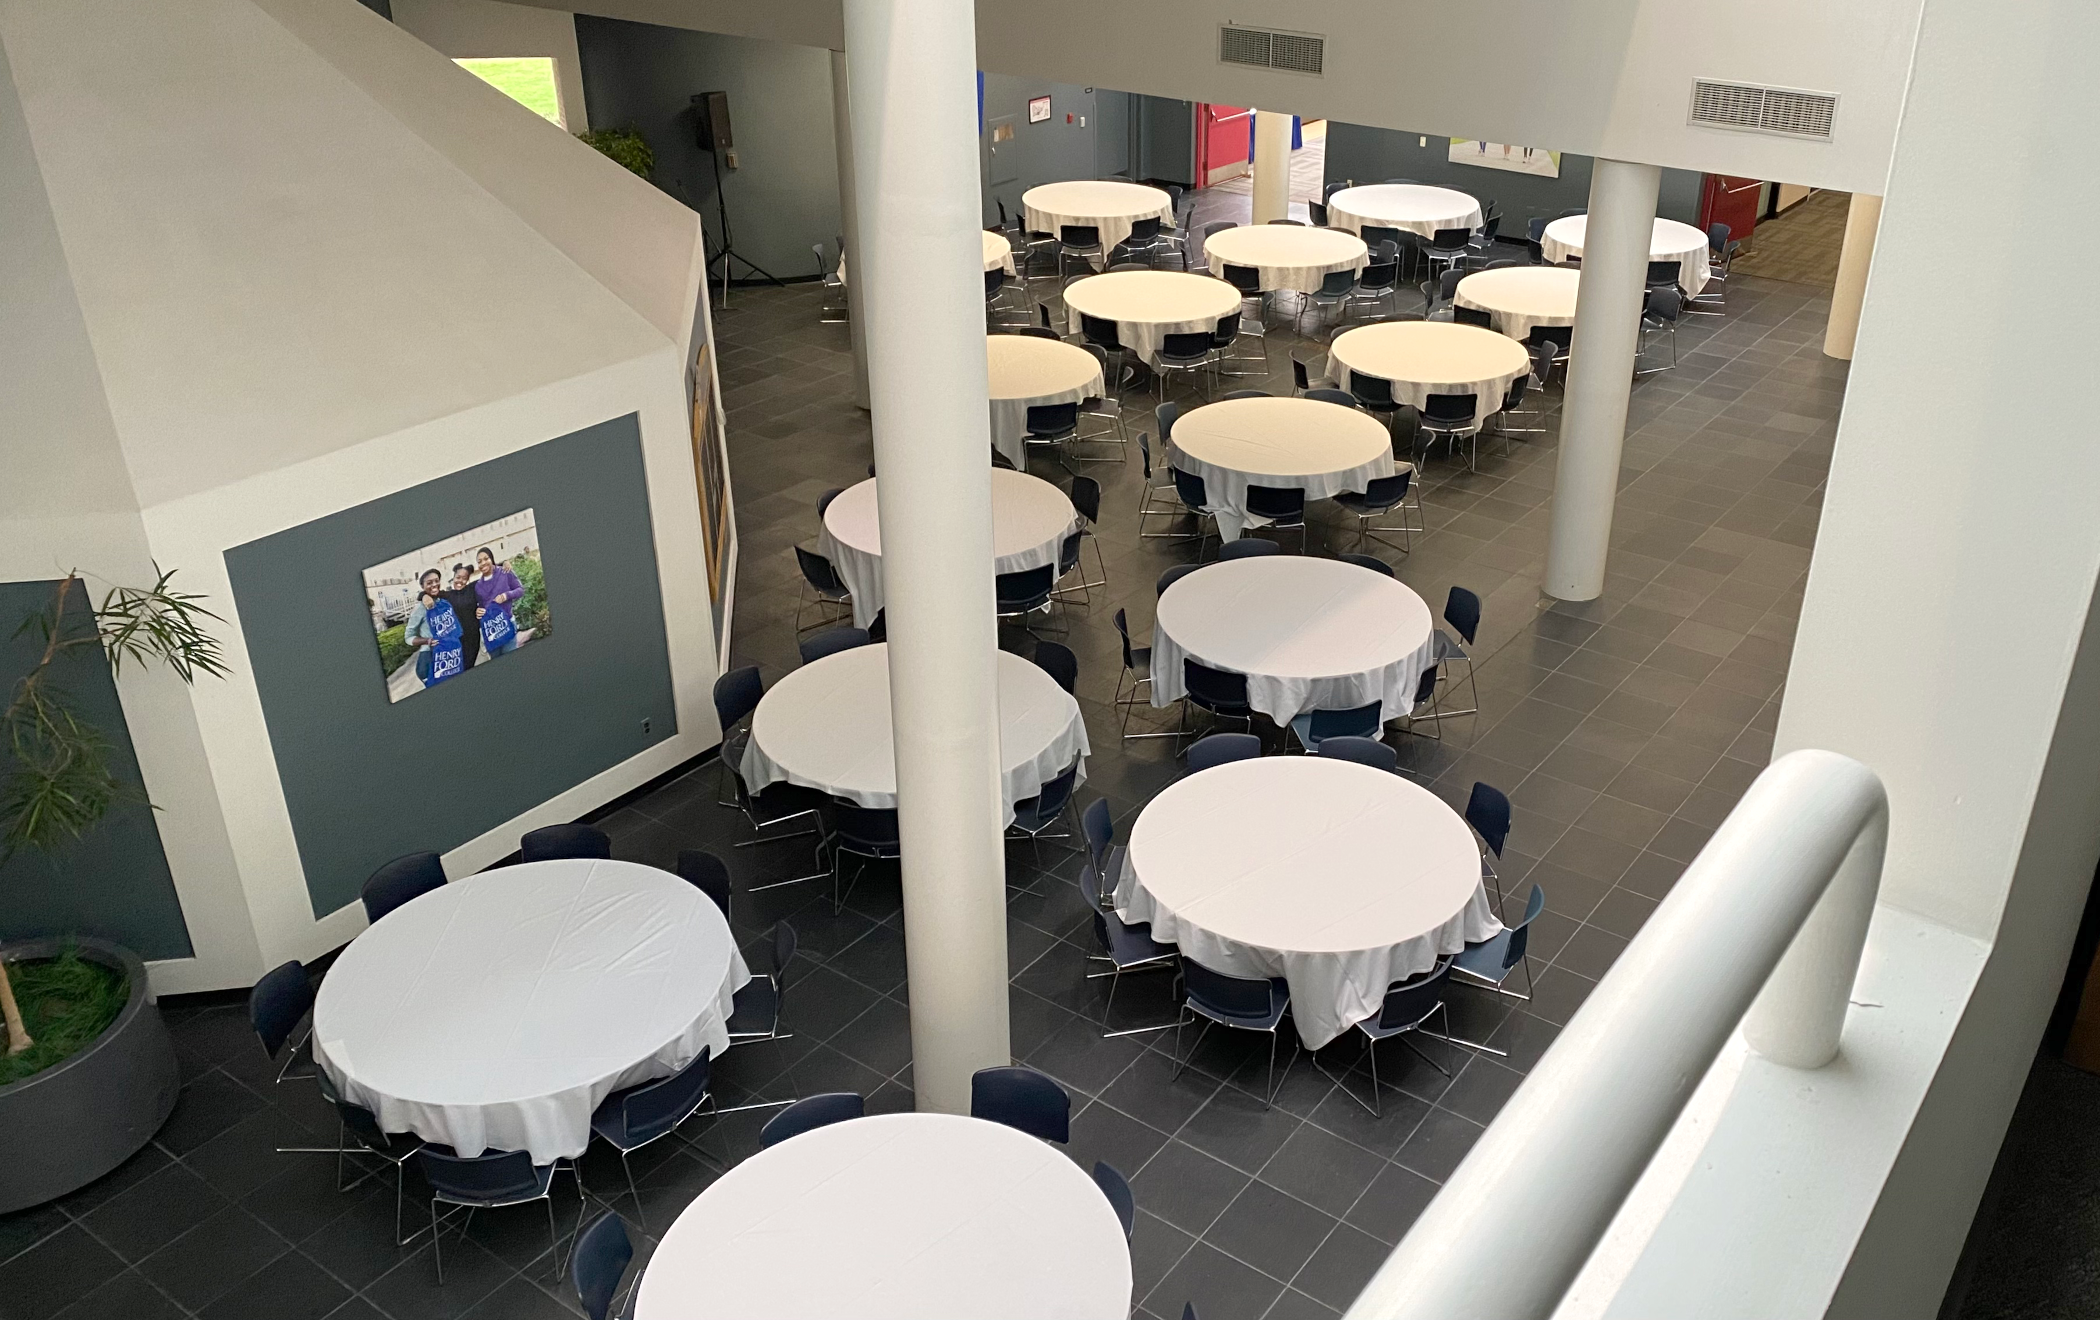 ASCC Atrium overhead view with round tables